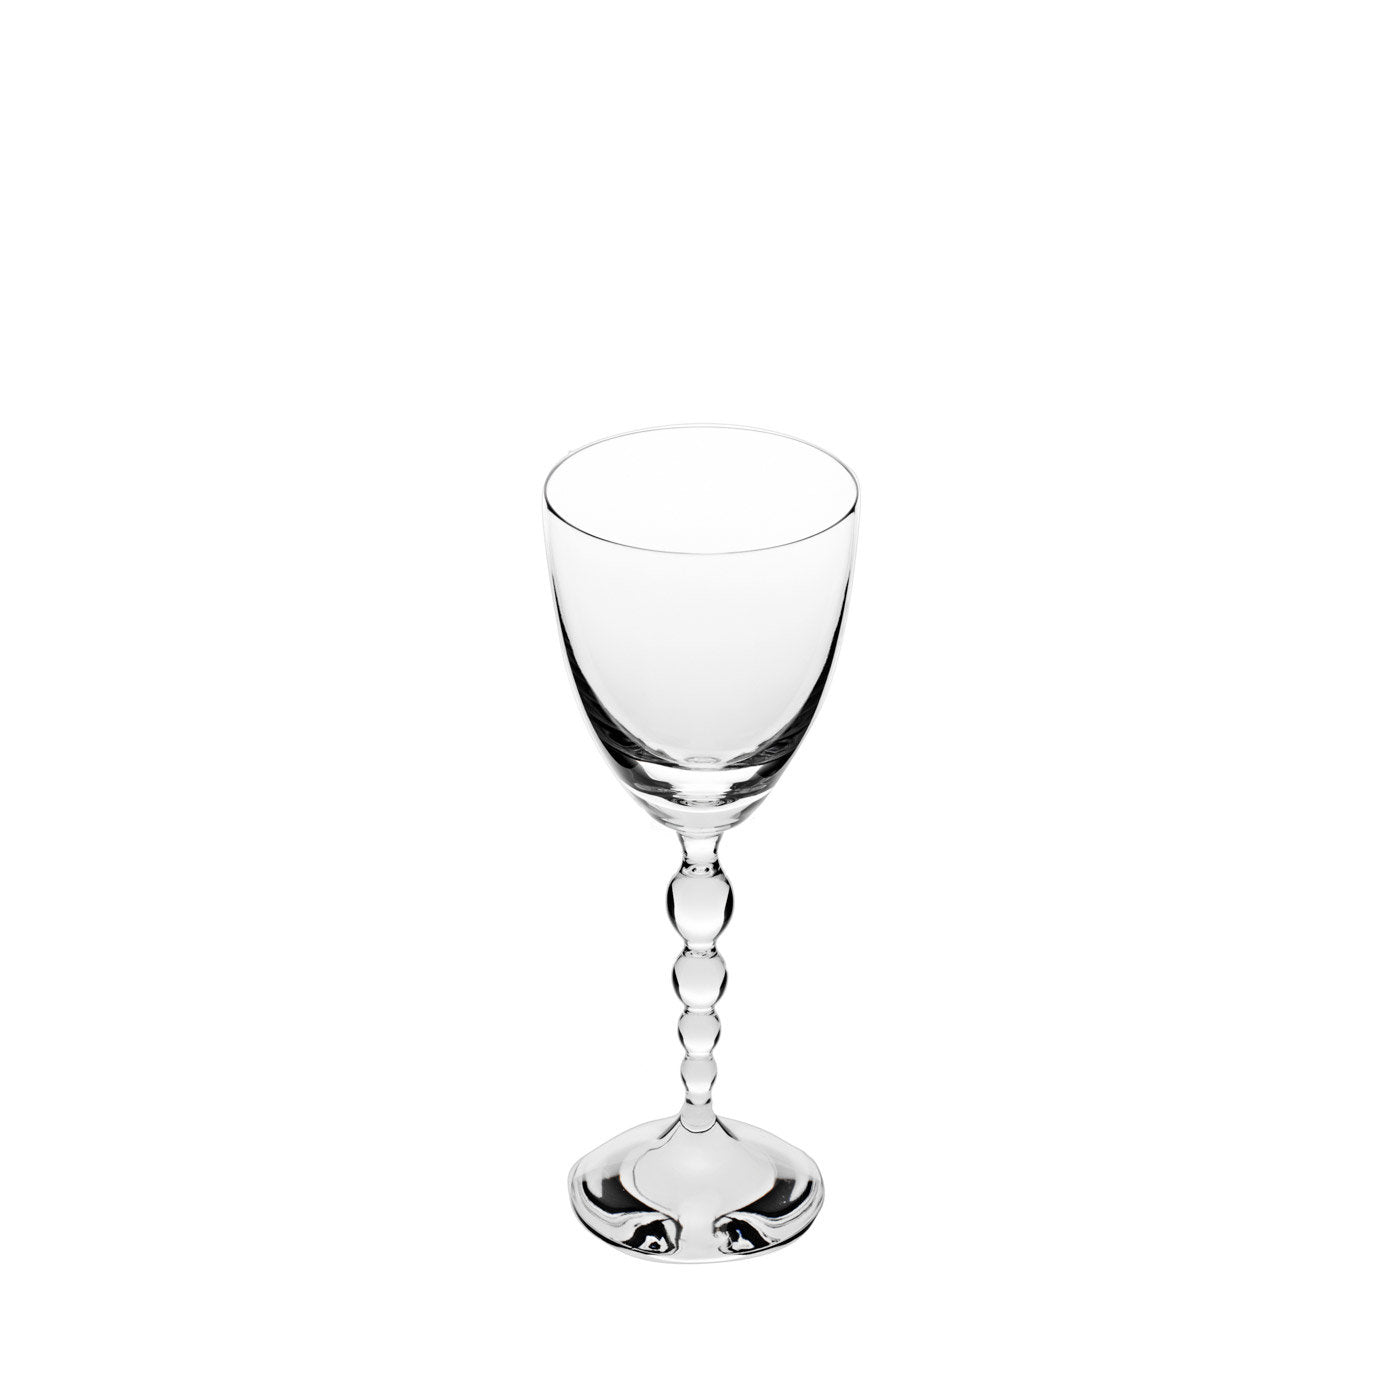 Set of 6 Collier Crystal Wine Glasses - Alternative view 1